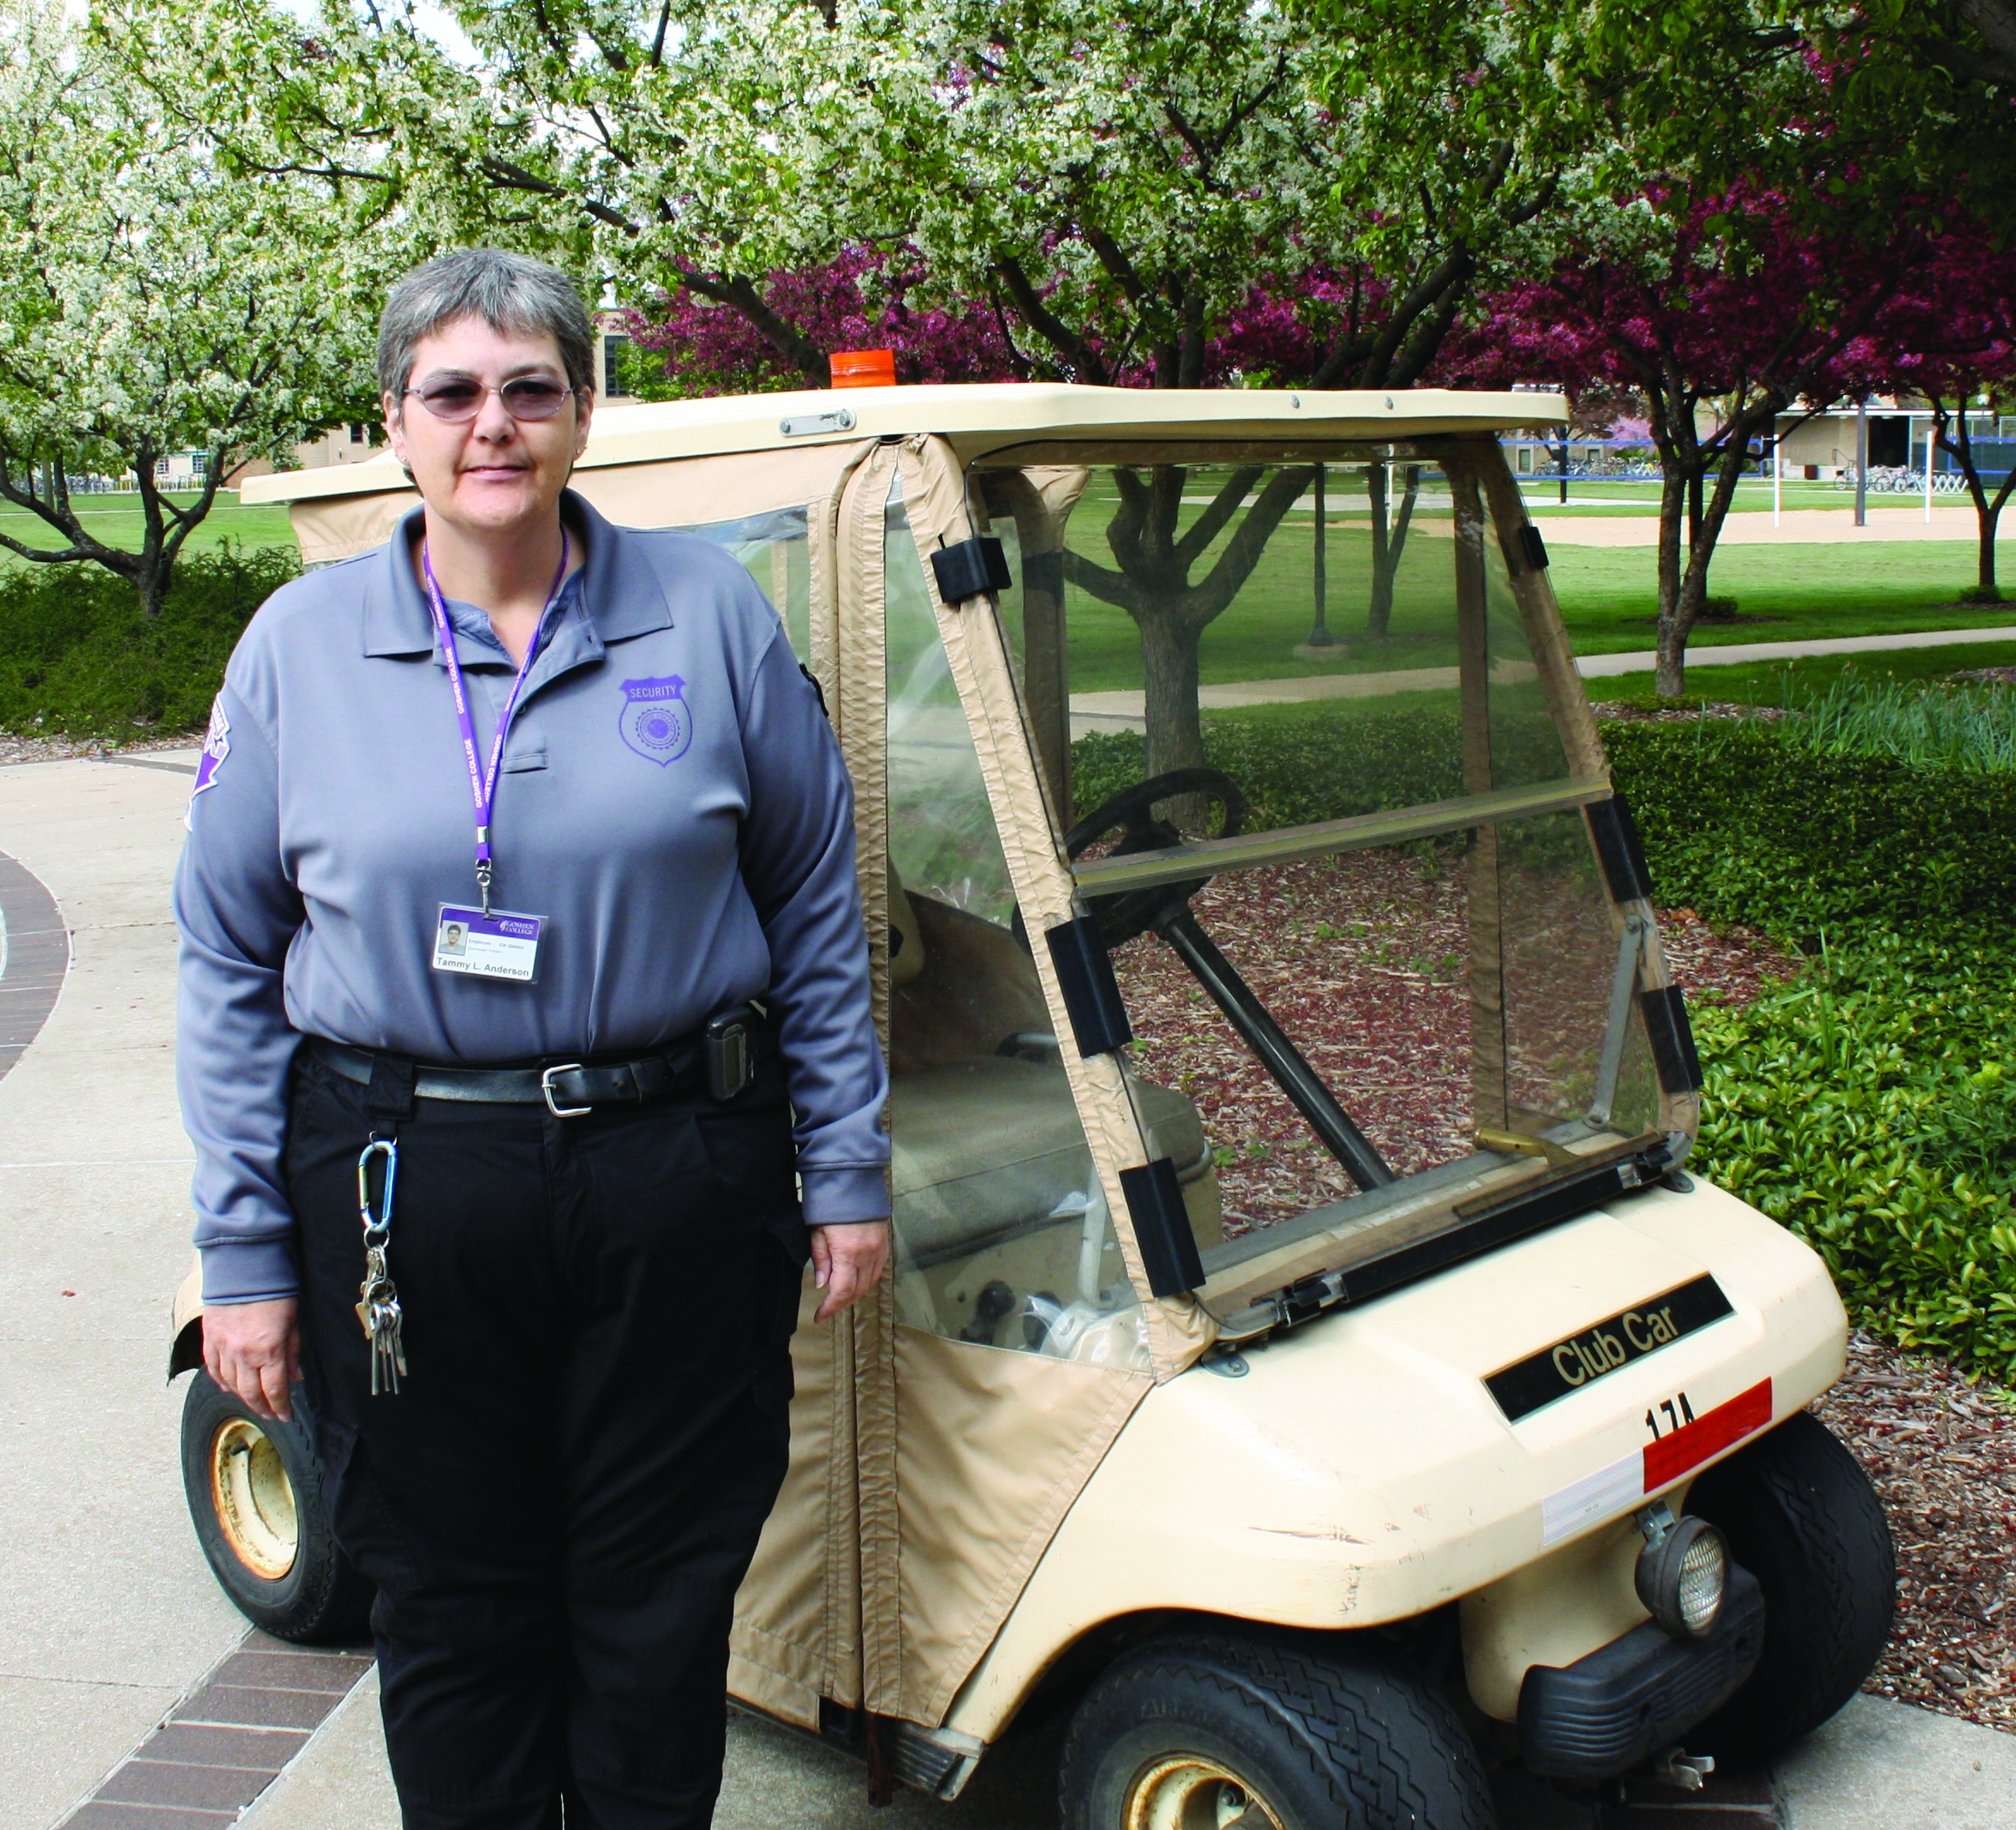 Tammy Anderson stands in front of a golf cart in her campus security uniform